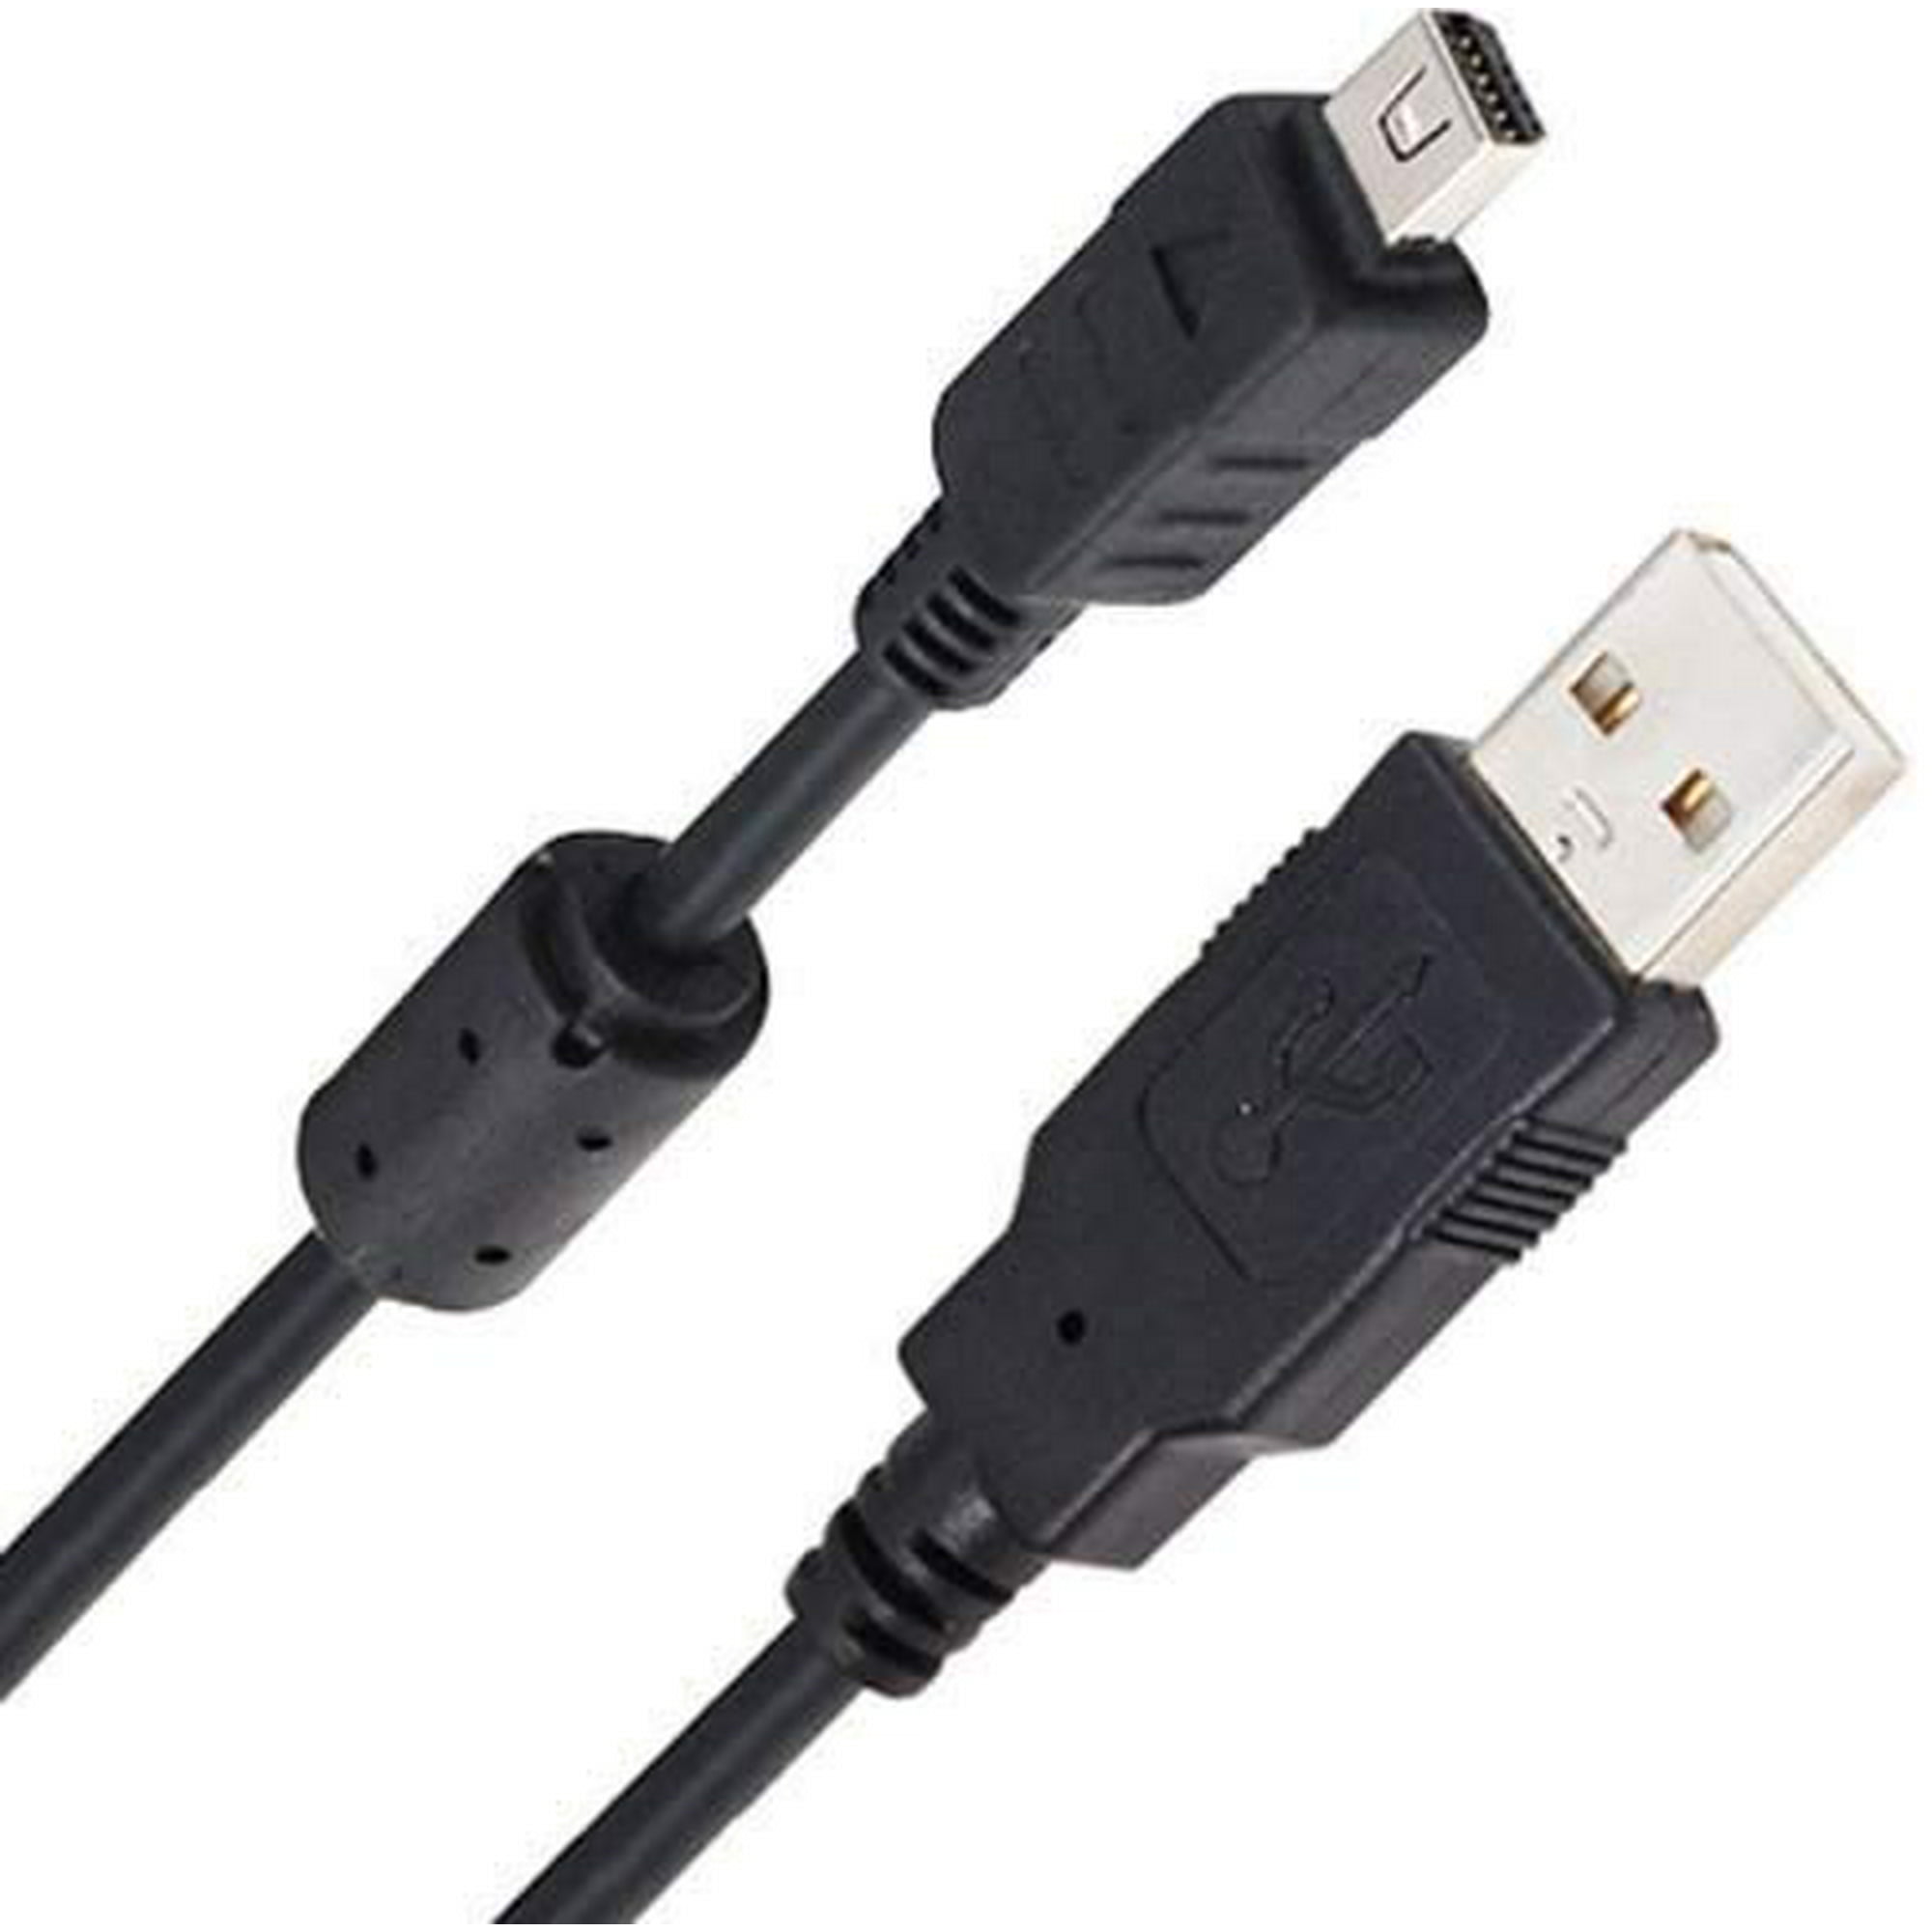 IENZA Data Picture Transfer Charger Charging Wire Cord Cable for Olympus  Tough TG-830 TG-630 TG-860 TG-870 (Not | Walmart Canada